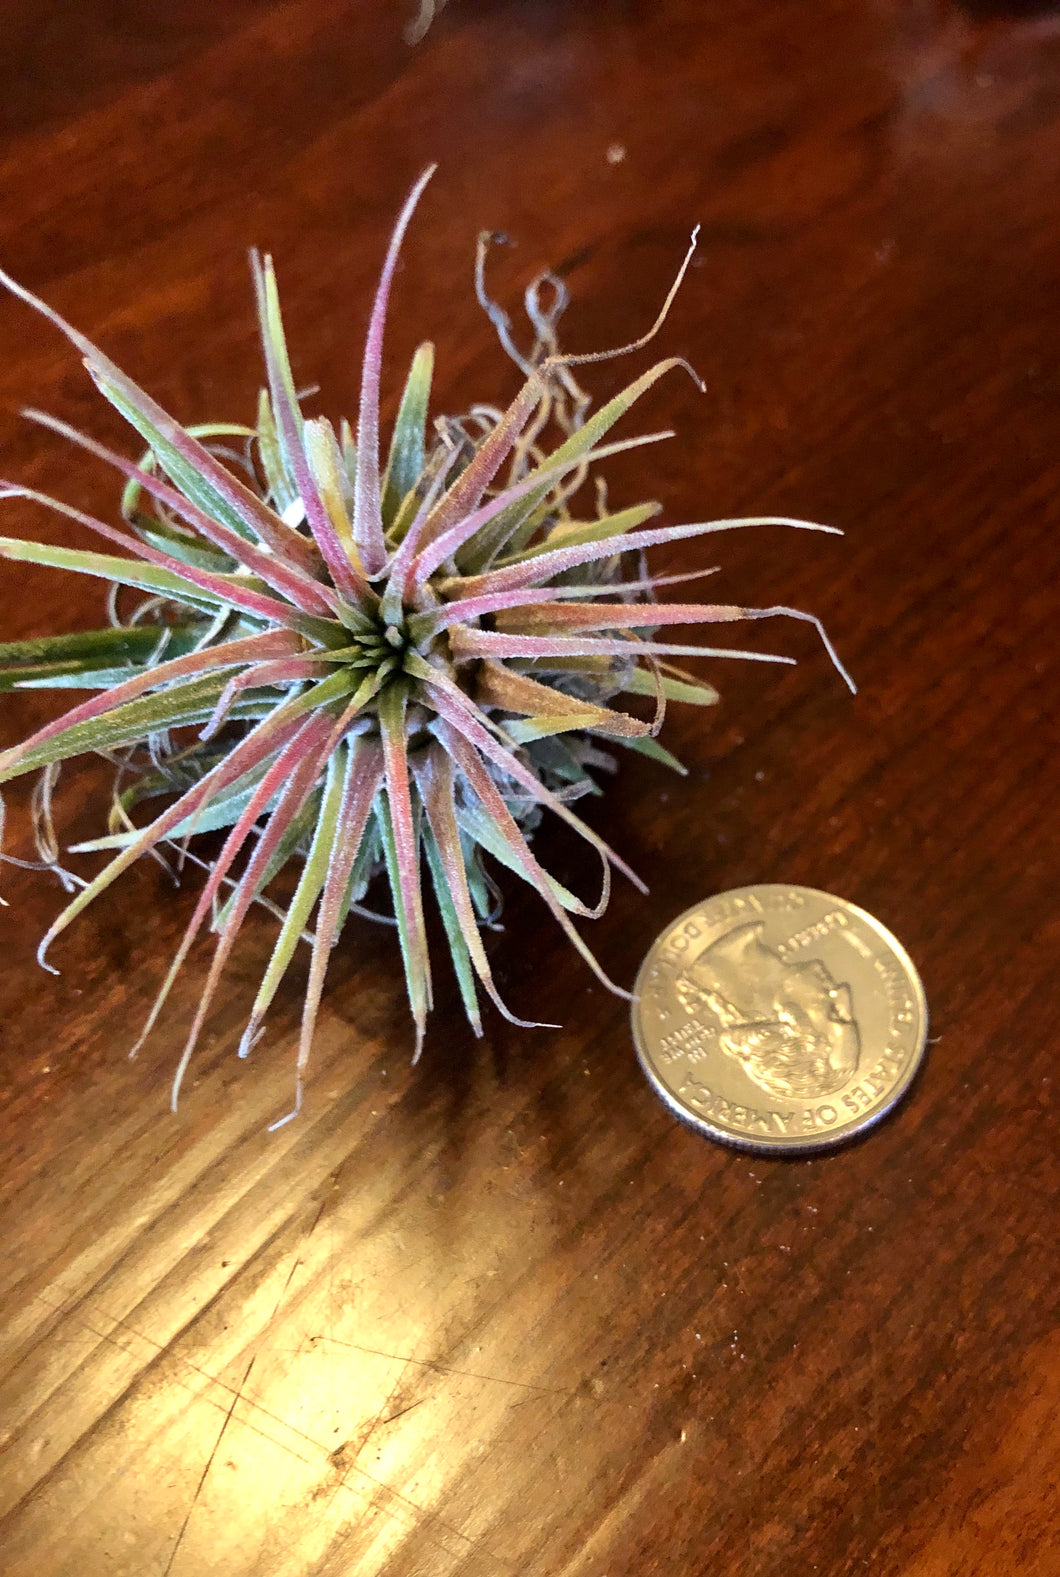 A SMALL, GREEN, AND PURPLE TILLANDSIA IONANTHA AIR PLANT IN A SMALL BLACK CONTAINER. THERE IS A QUARTER NEXT TO IT SHOWING HOW SMALL THE PLANT IS. THEY ARE SITTING ON A DARK BROWN TABLE. THE VARIANT COLORS ARE NATURAL, PEACH, PINK, PURPLE, AND RED.